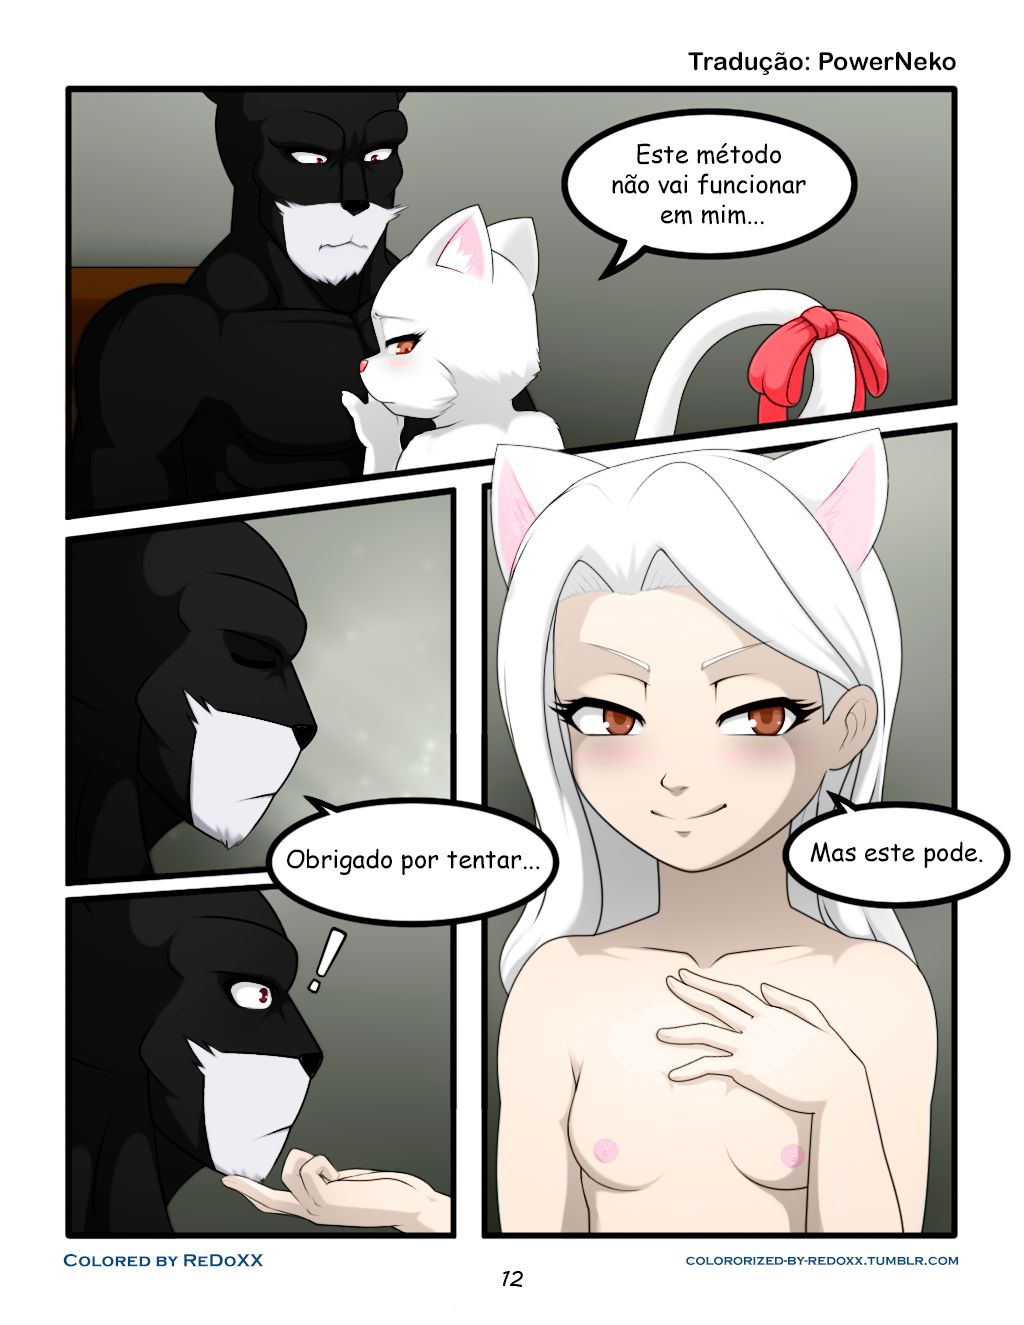 [Darkmirage]Size Counts (O Tamanho Importa) [Colorized by ReDoXX] [Portuguese-BR] [Translated by PowerNeko] 13